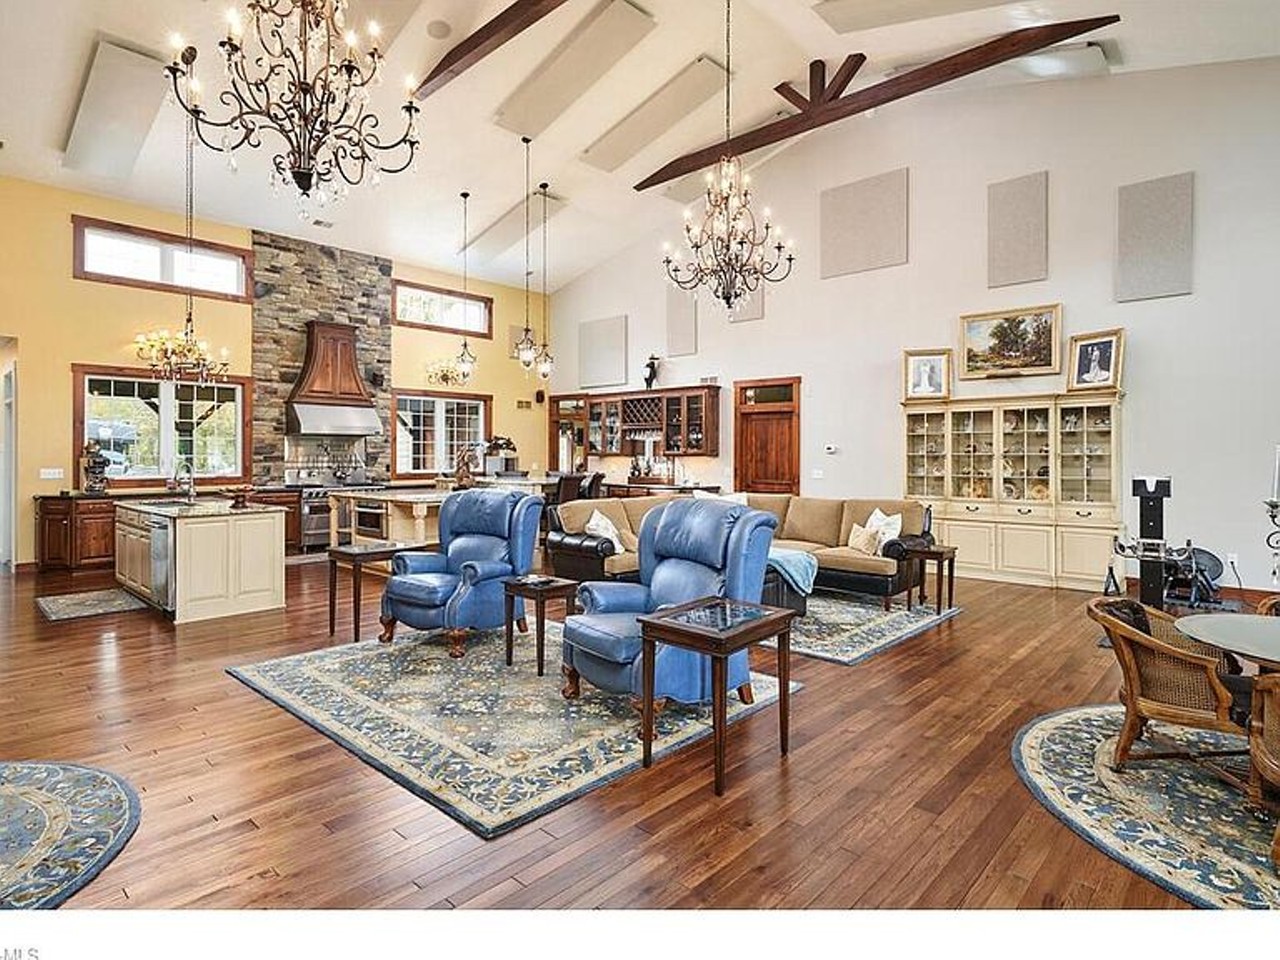  12100 Tinkers Creek Rd., Valley View 
$2,800,000, 4,142 Square Feet 